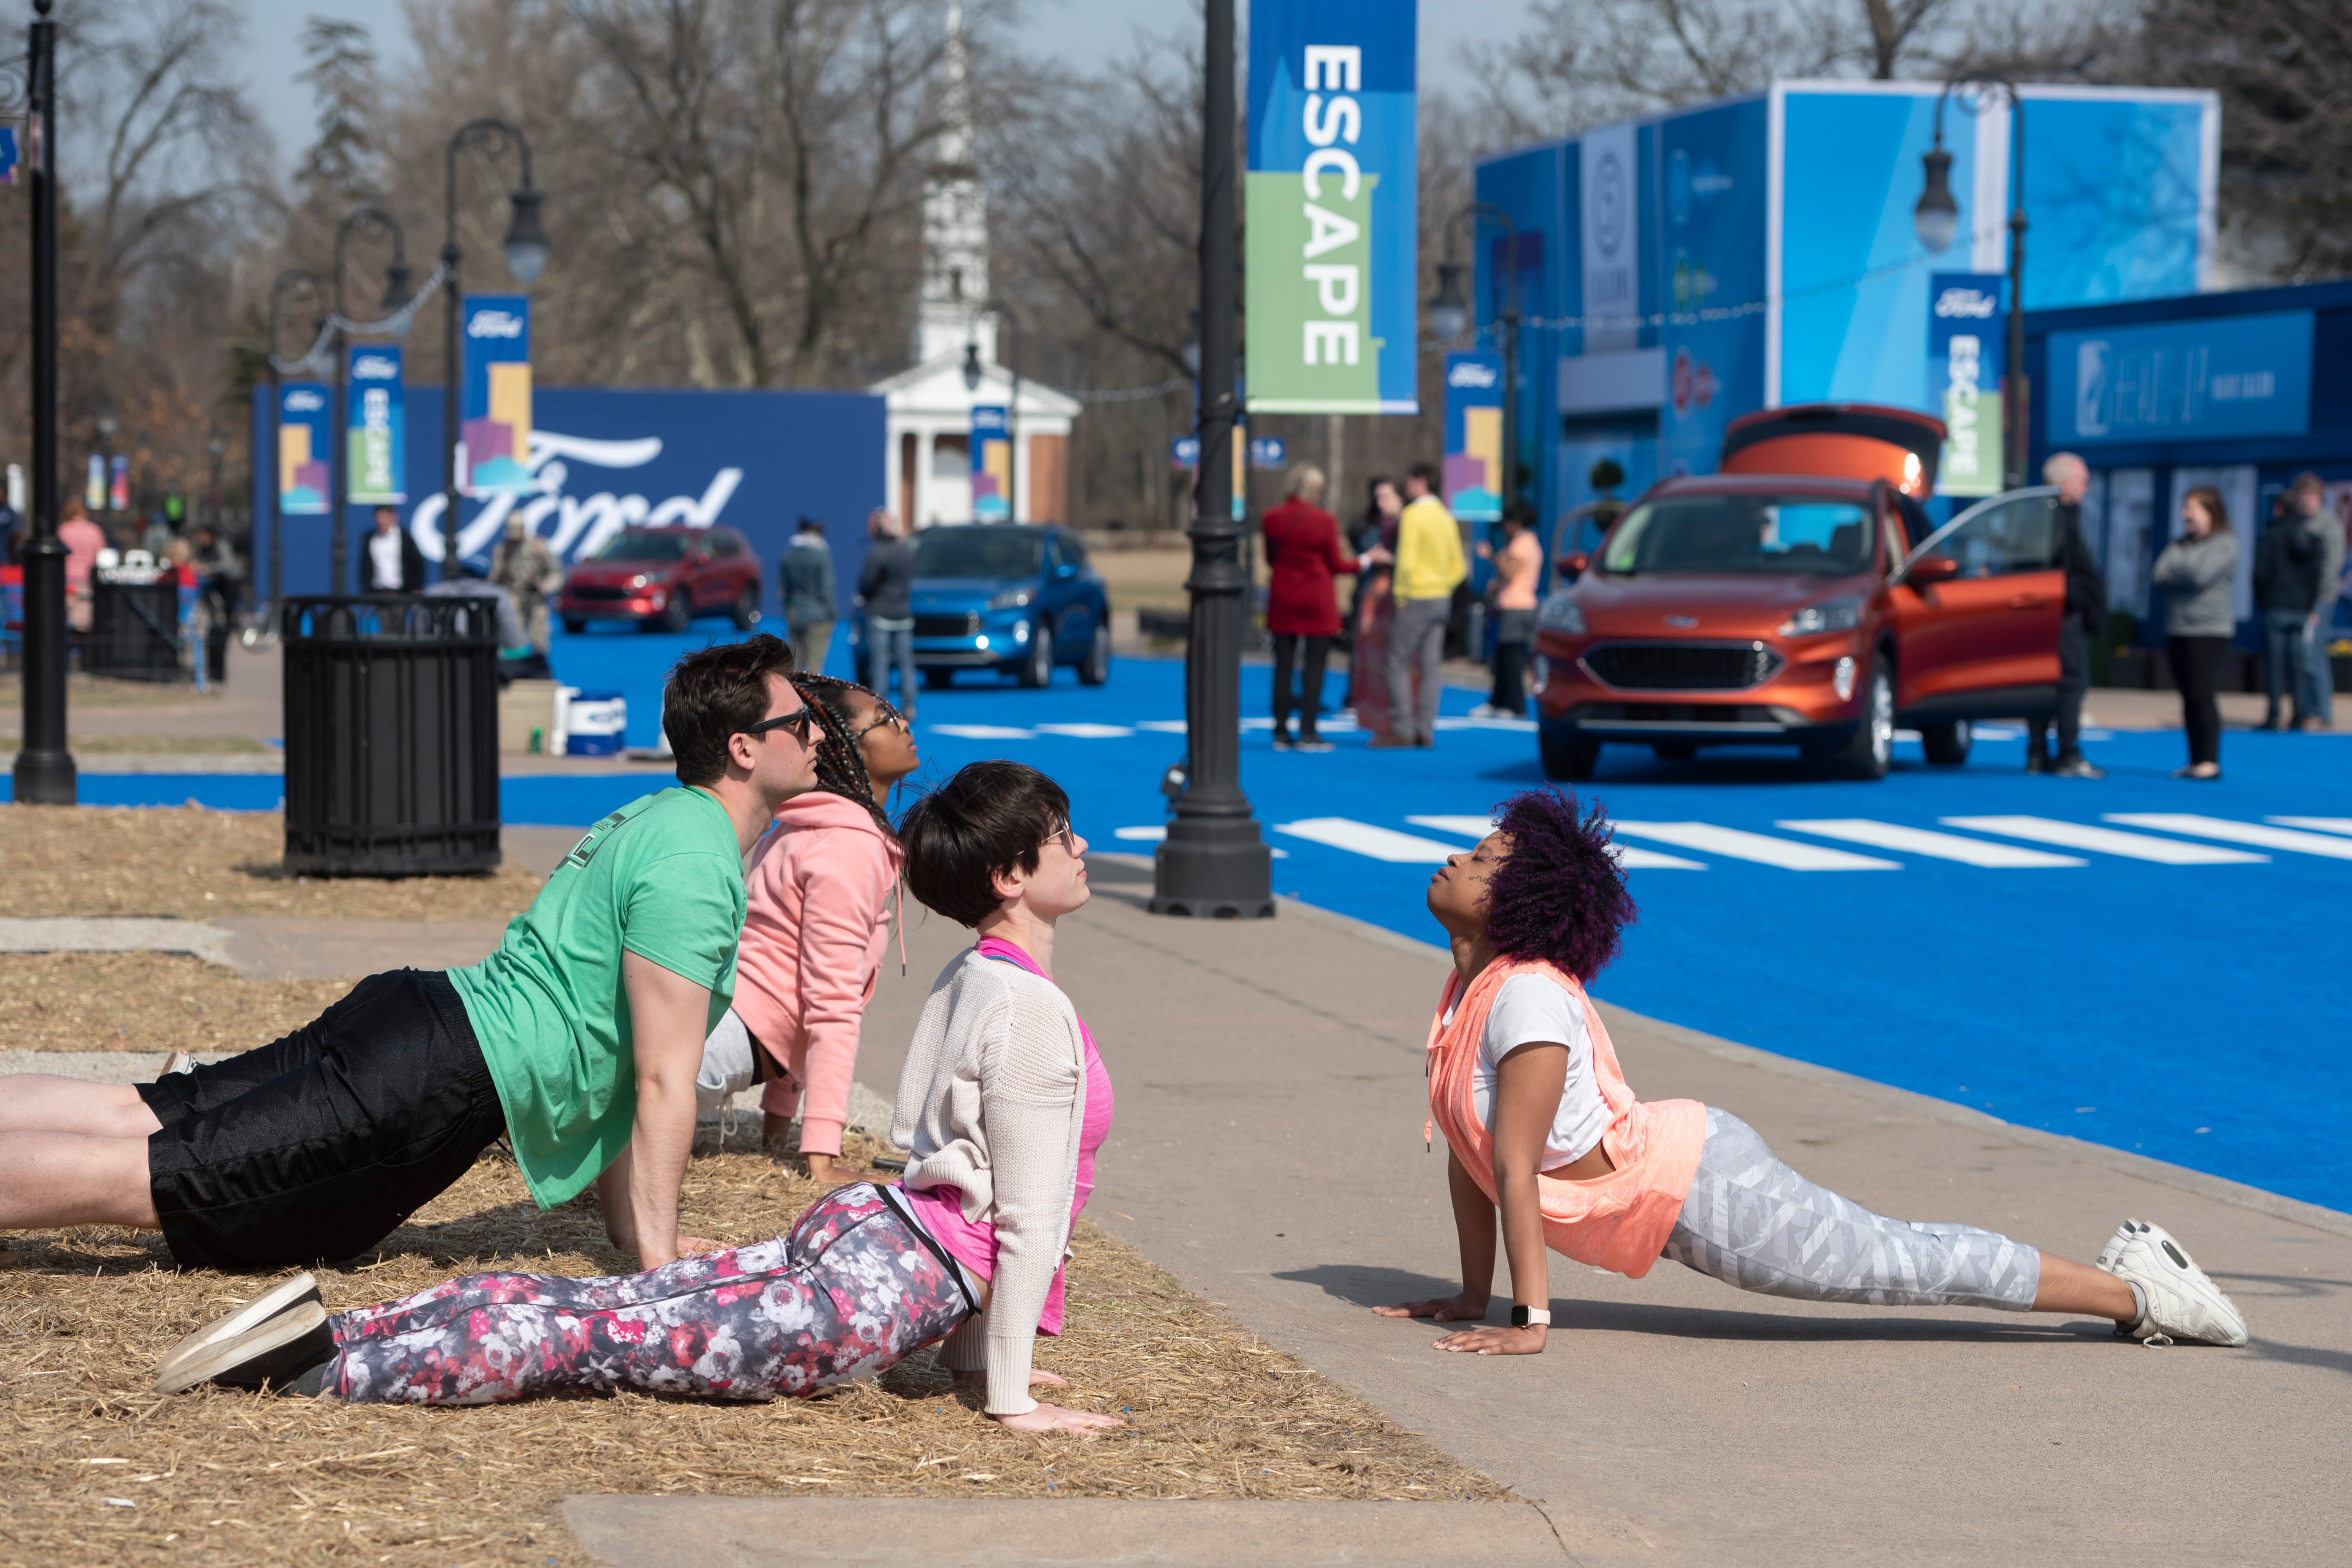 Actors perform the act of participating in a yoga class during a reveal of the 2020 Ford Escape, at Greenfield Village. The performers simulated potentially real scenarios from everyday living.